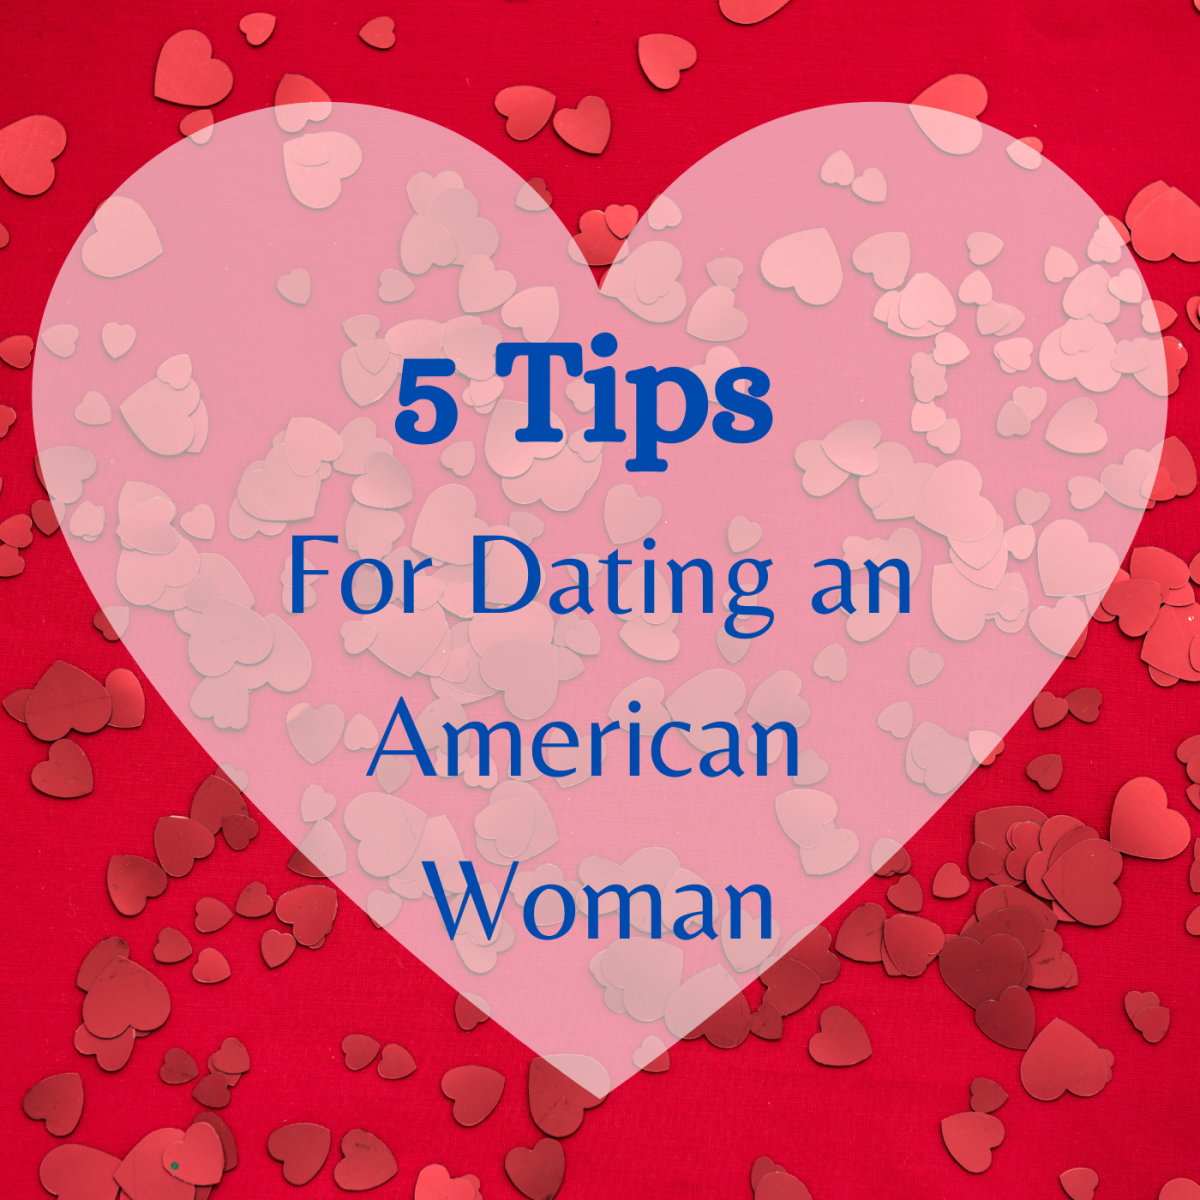 5 Tips for Dating an American Woman